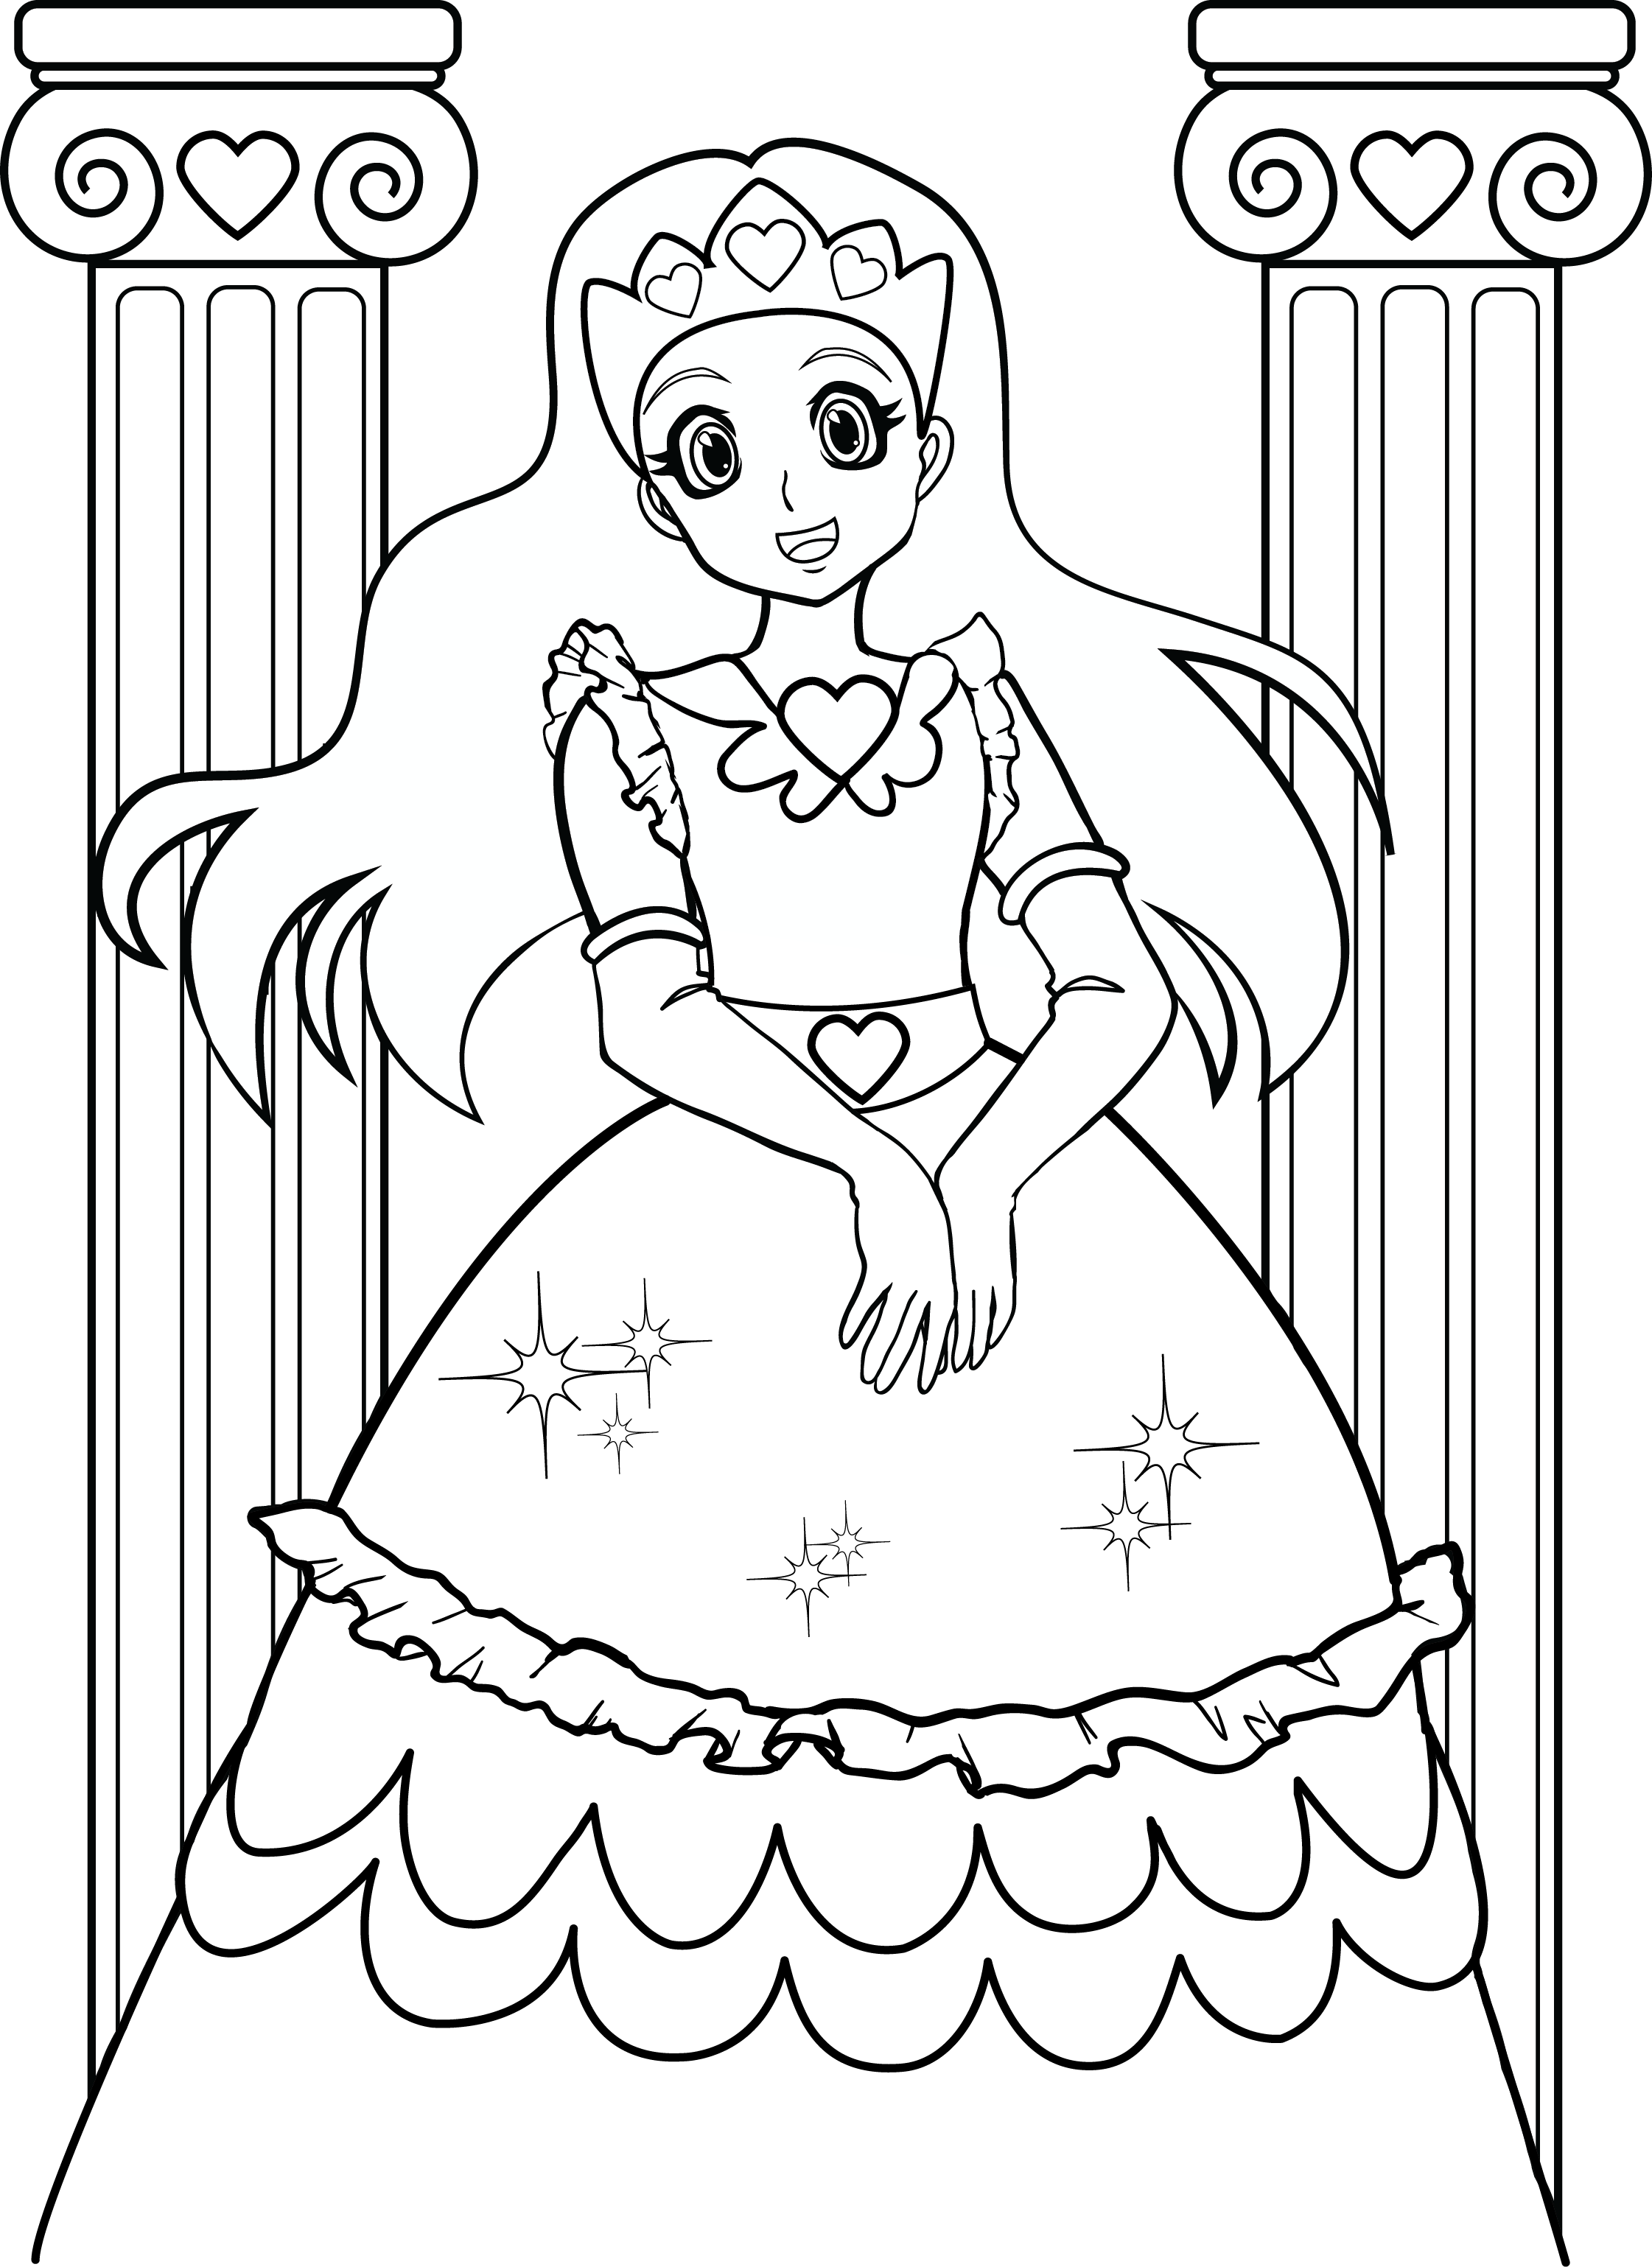 Printable Coloring Pages For Girls 2